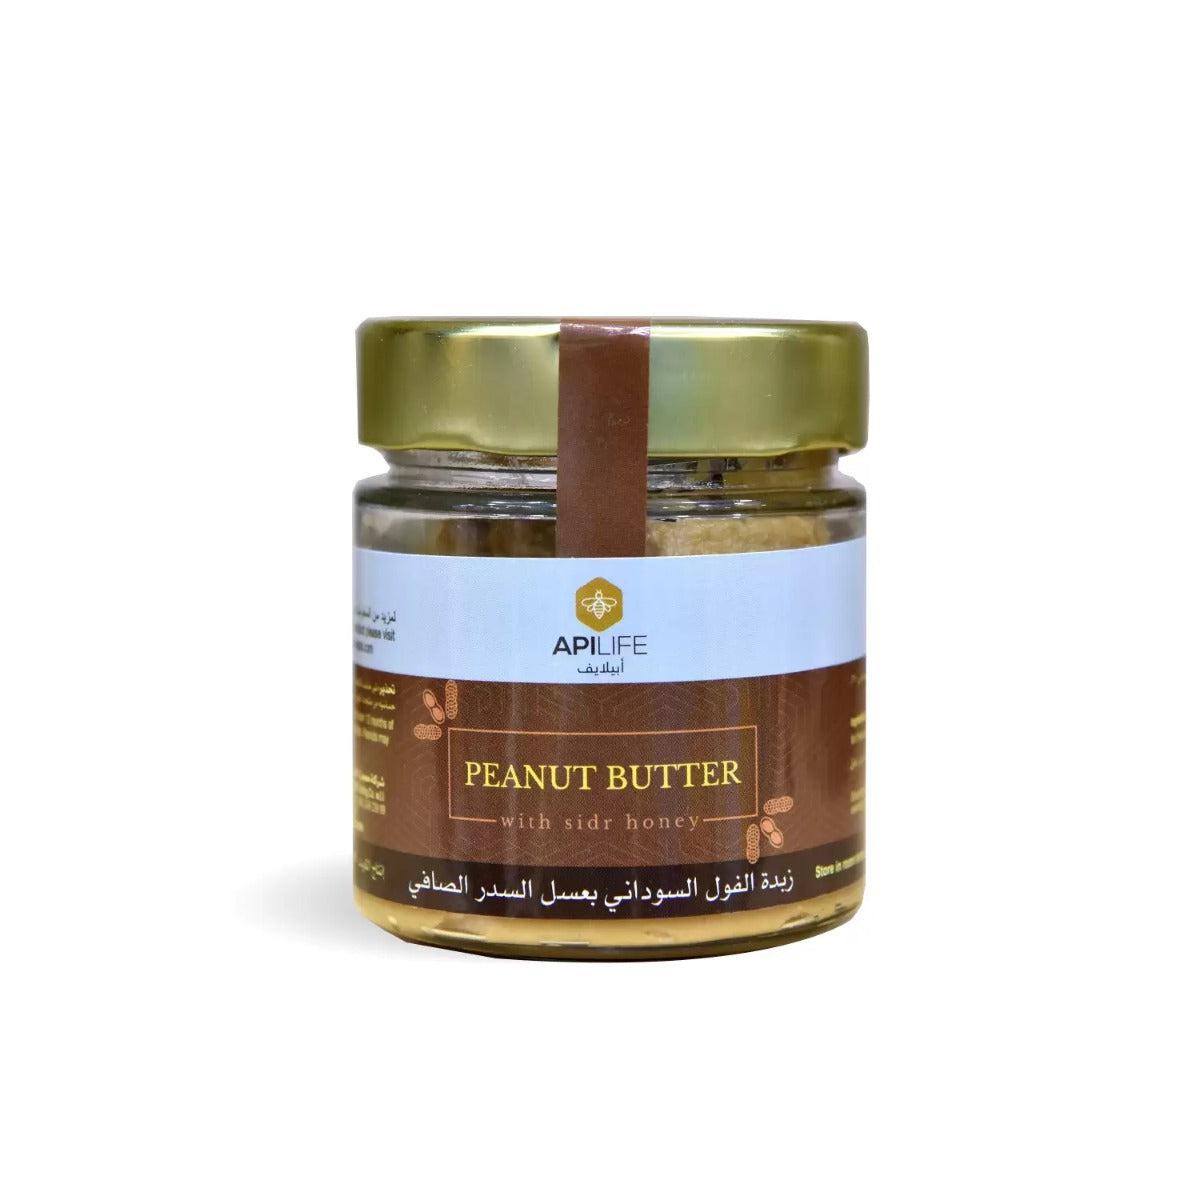 ApiLife Peanut Butter with Sidr Honey 200g